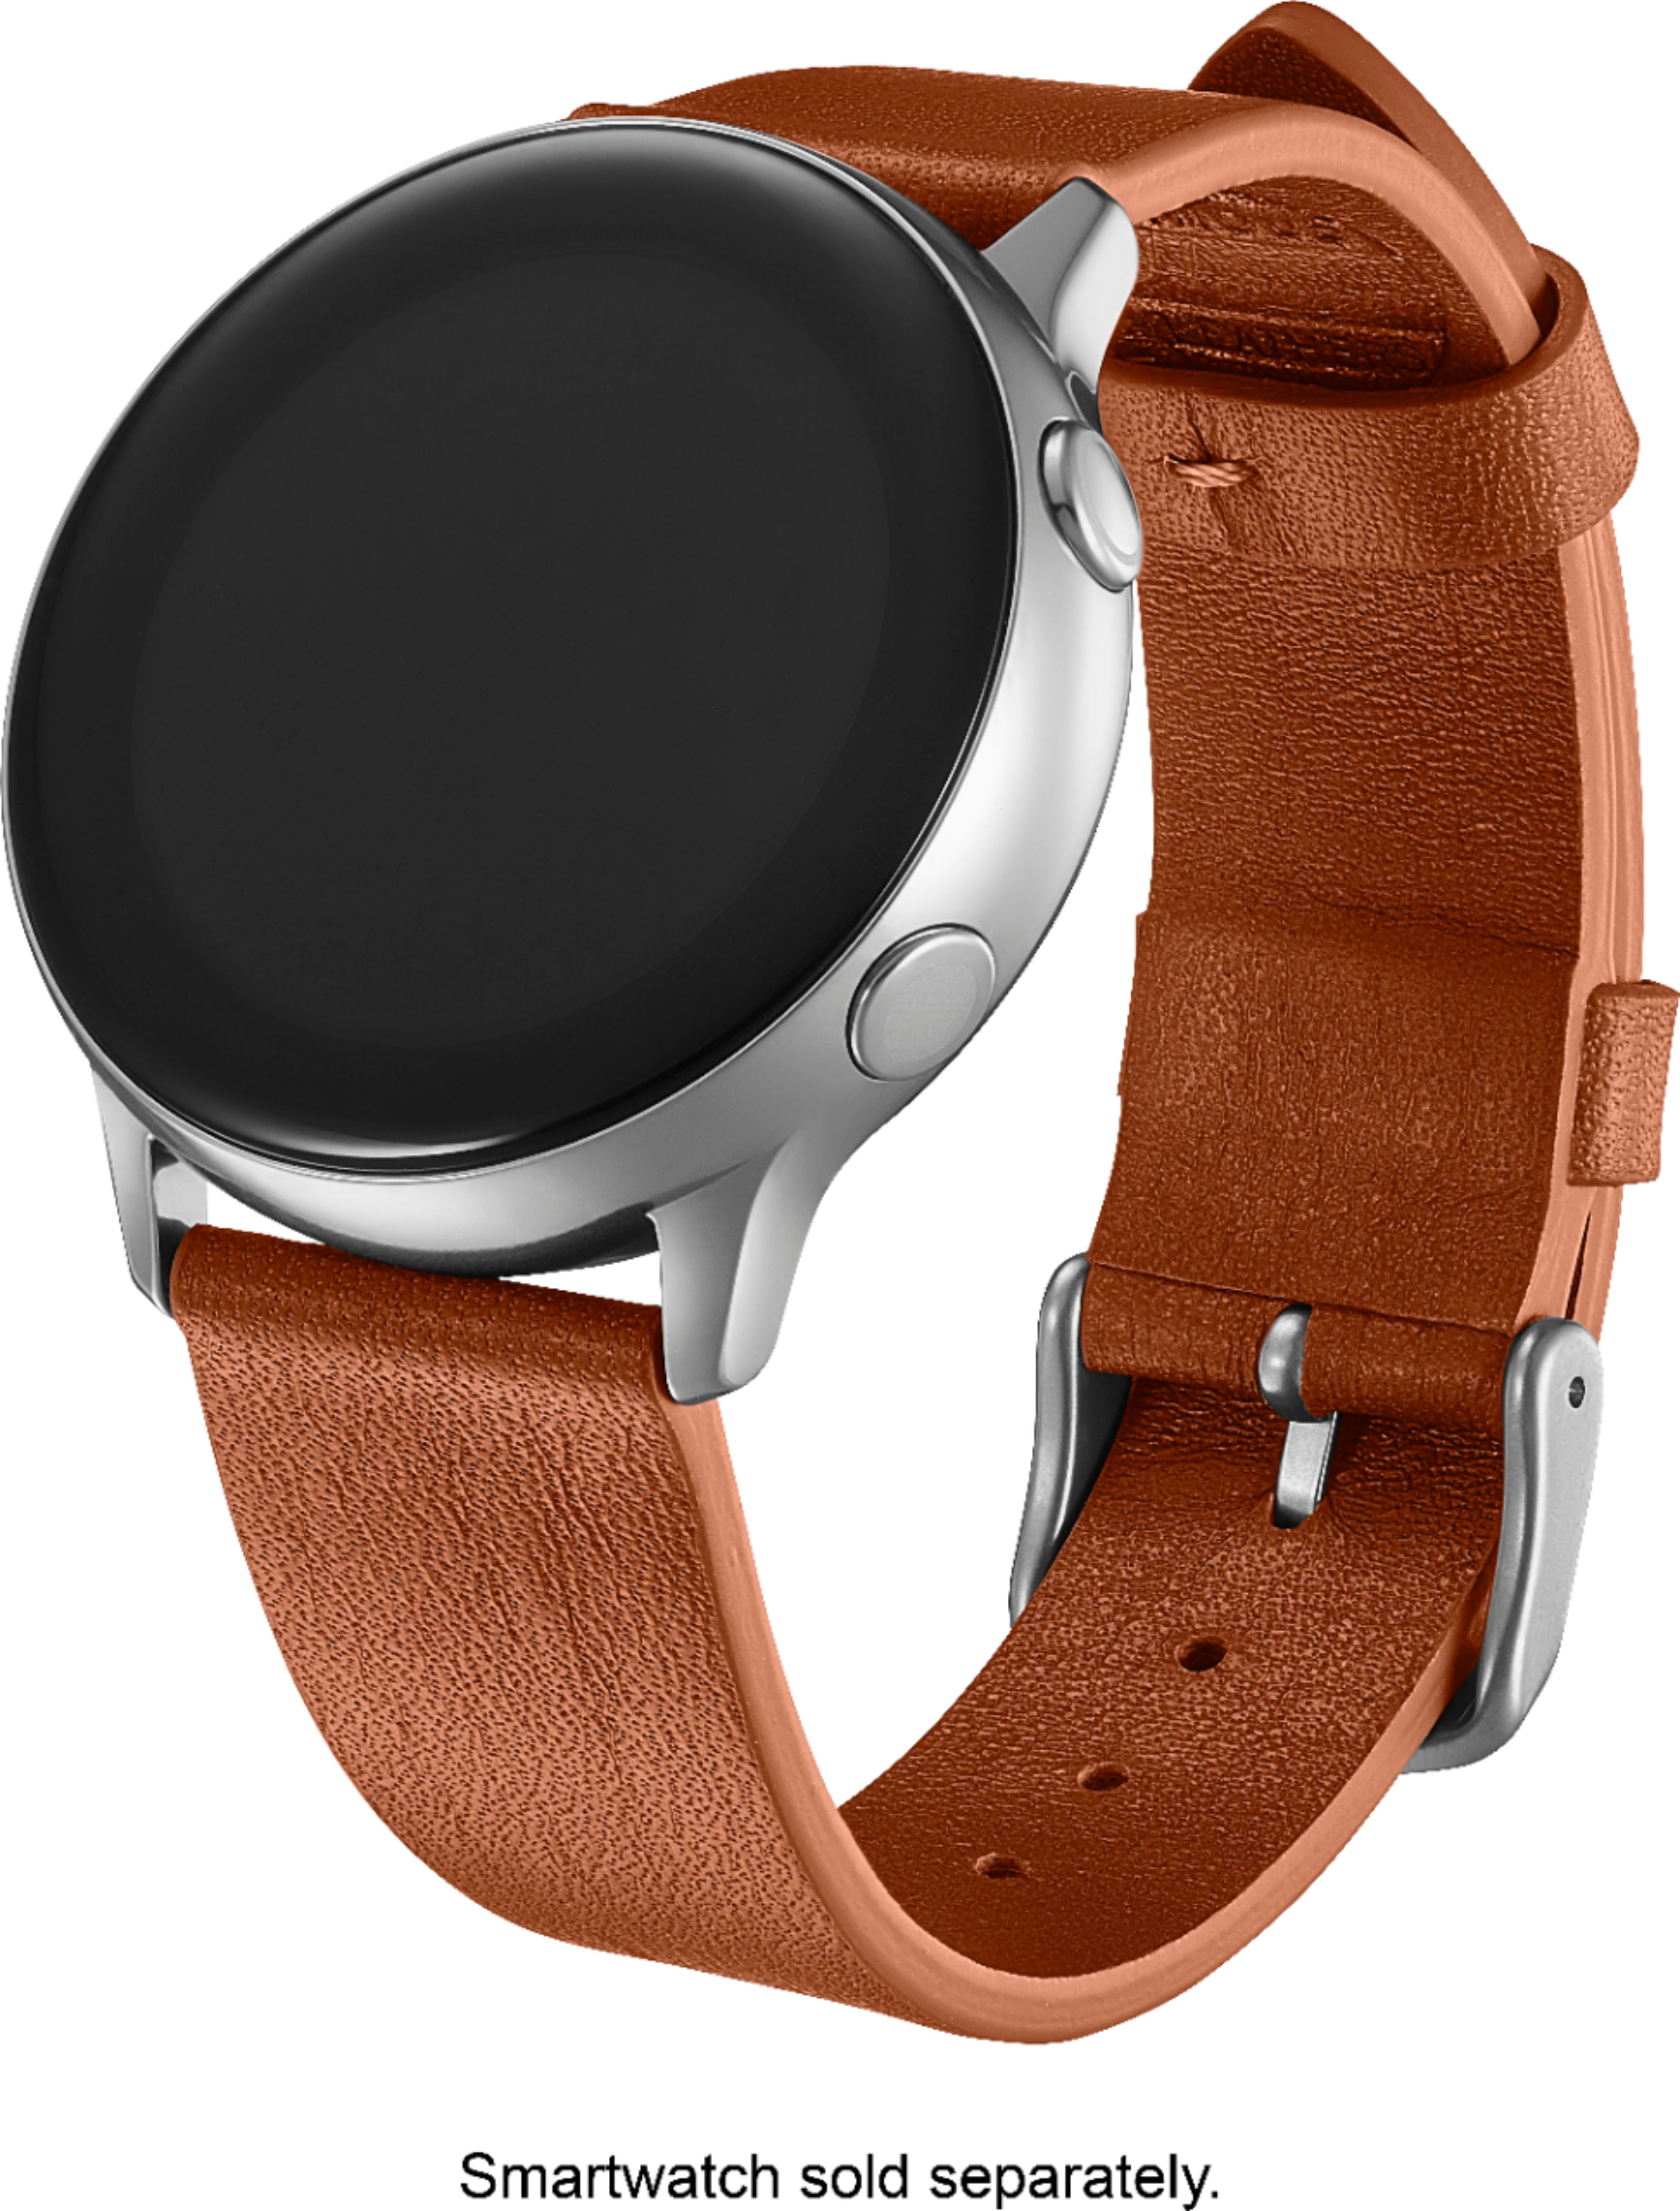 Left View: Platinum™ - Leather Watch Band for Samsung Galaxy Watch, Galaxy Watch3, Galaxy Watch4, Galaxy Active, and Galaxy Active 2 - Copper